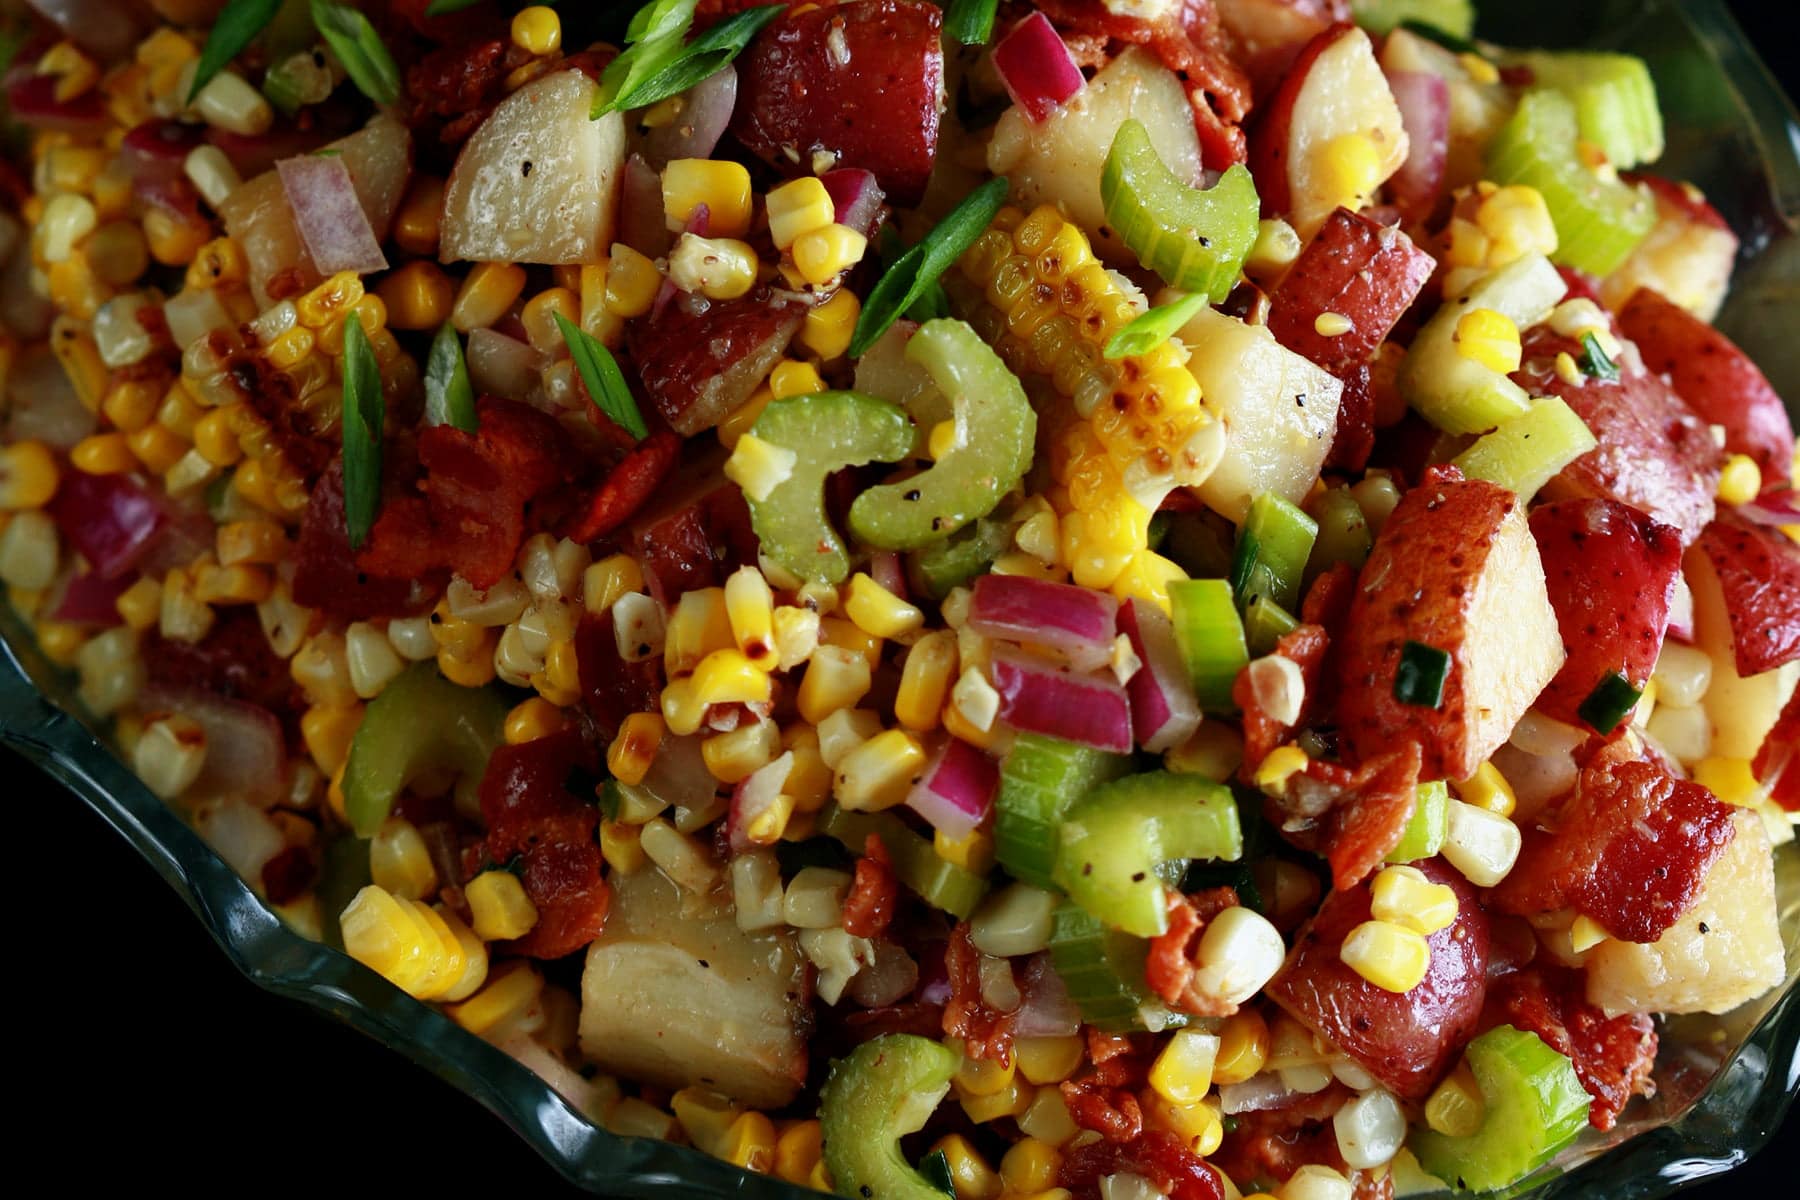 A close up photo of roasted corn and potato salad. Chunks of red potato, bacon pieces, celery slices, green onion, and corn kernels are all visible in the colourful mix.